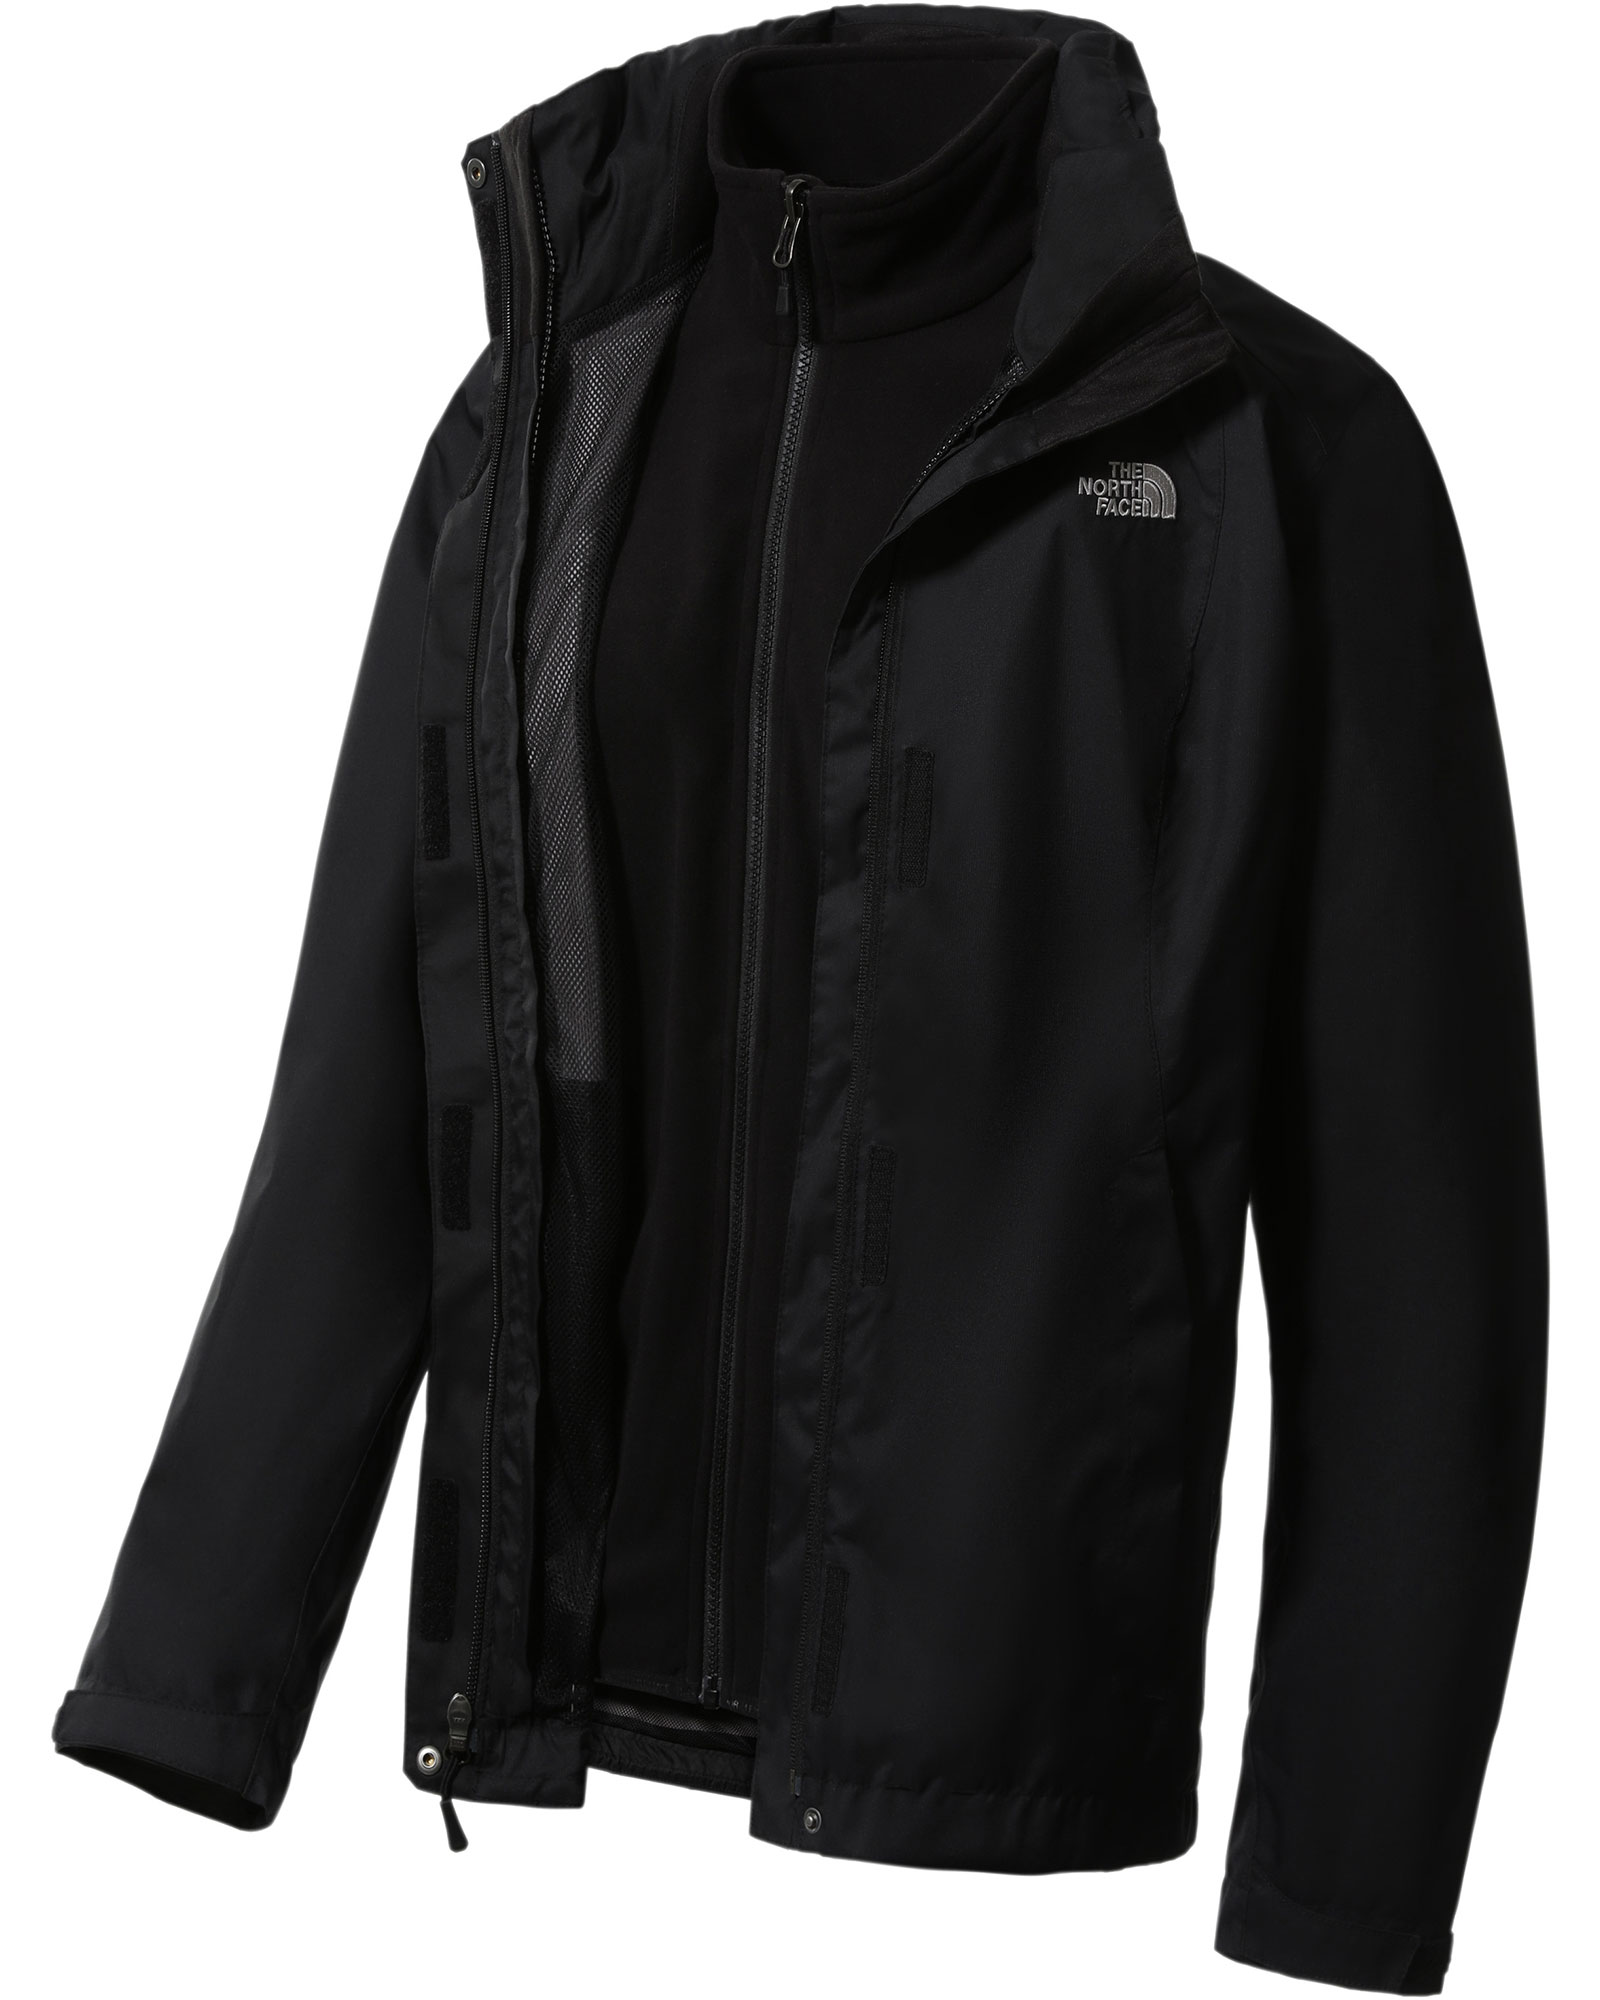 The North Face Women's Evolve Triclimate Jacket